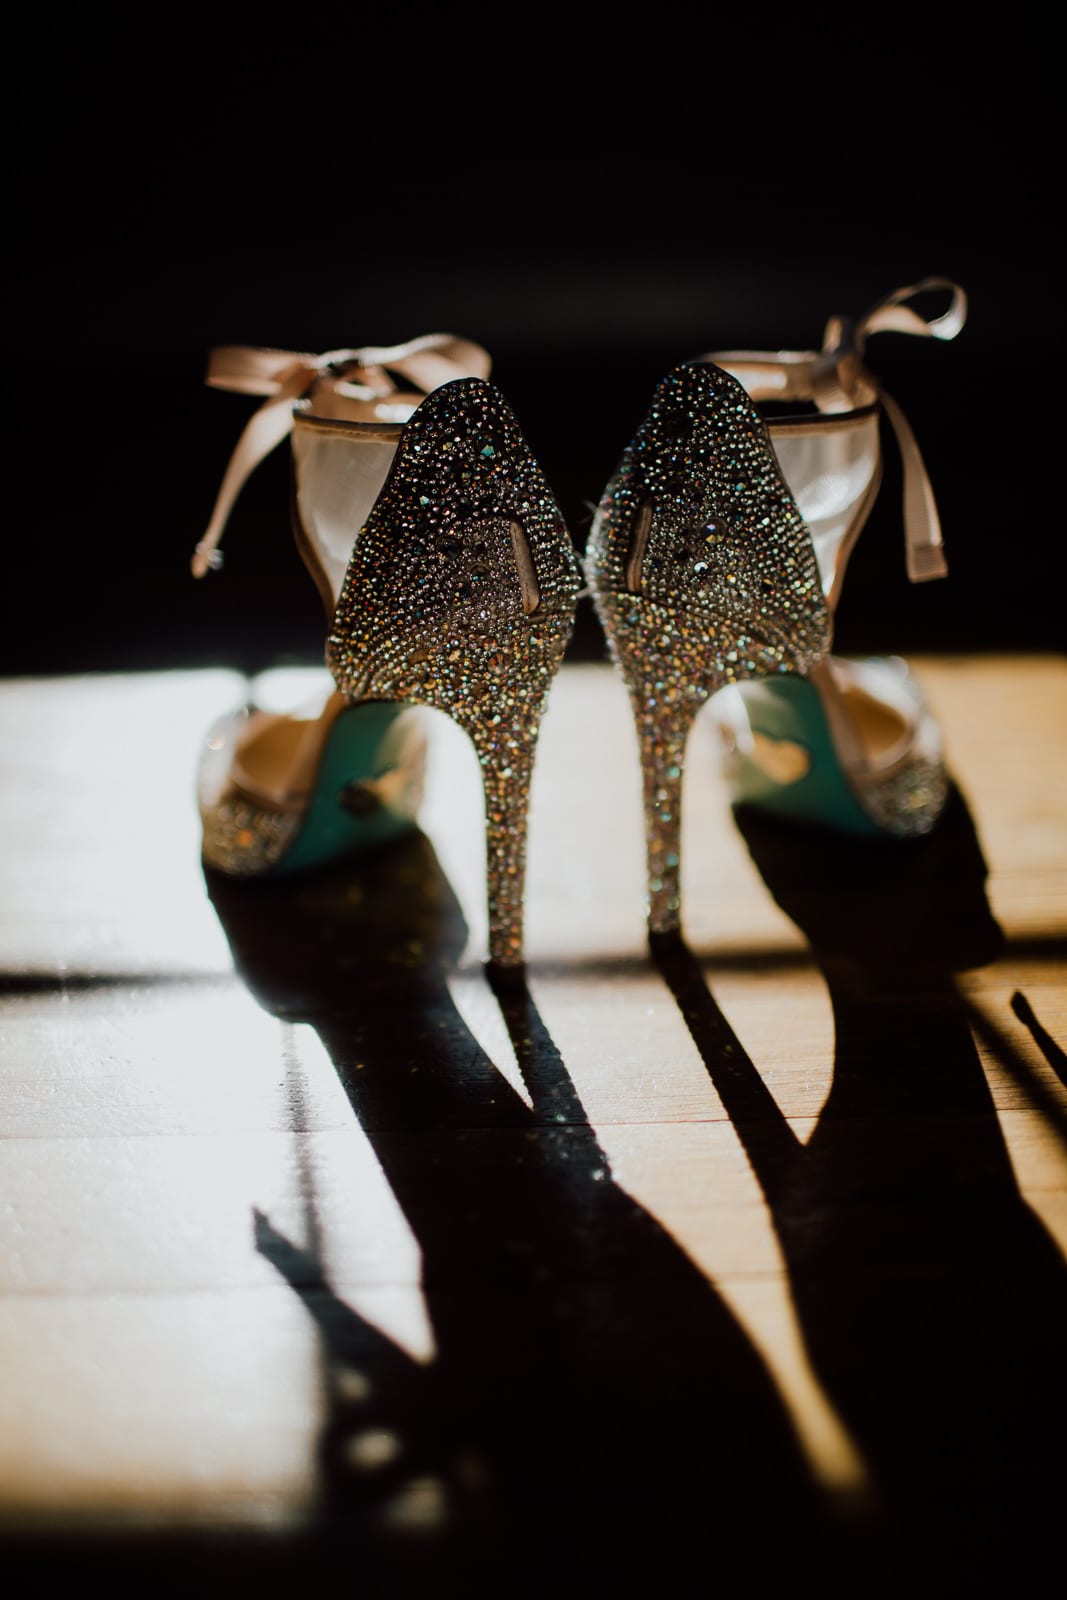 Wedding shoes in sunlight from a window